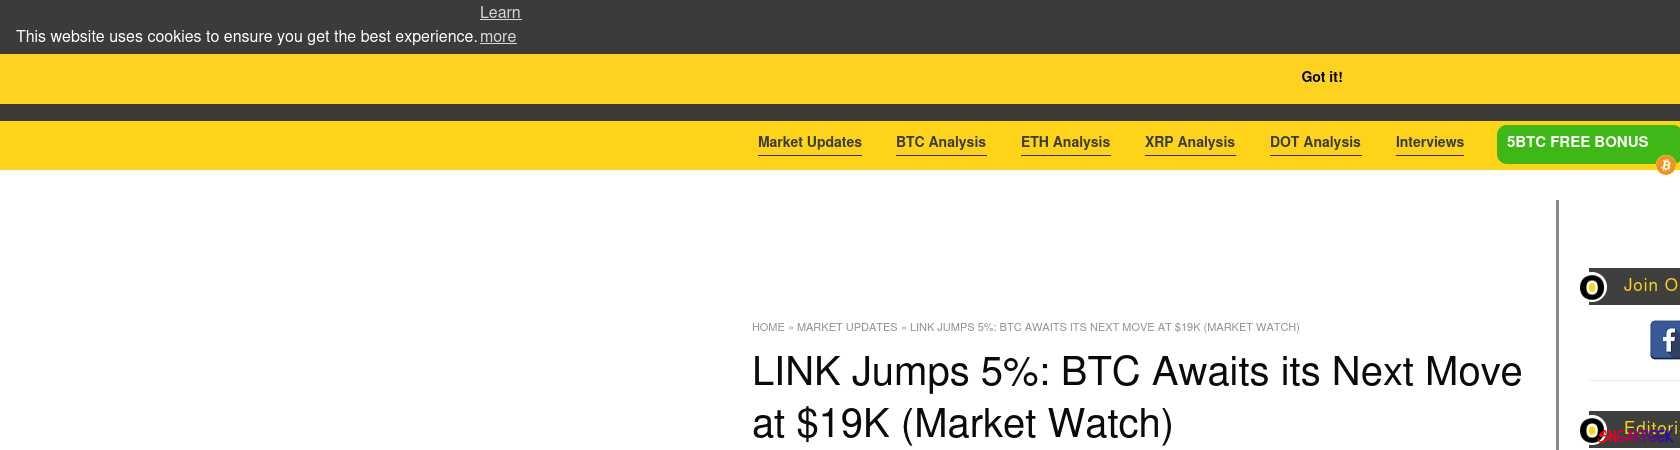 Read the full Article:  ⭲ LINK Jumps 5%: BTC Awaits its Next Move at $19K (Market Watch)